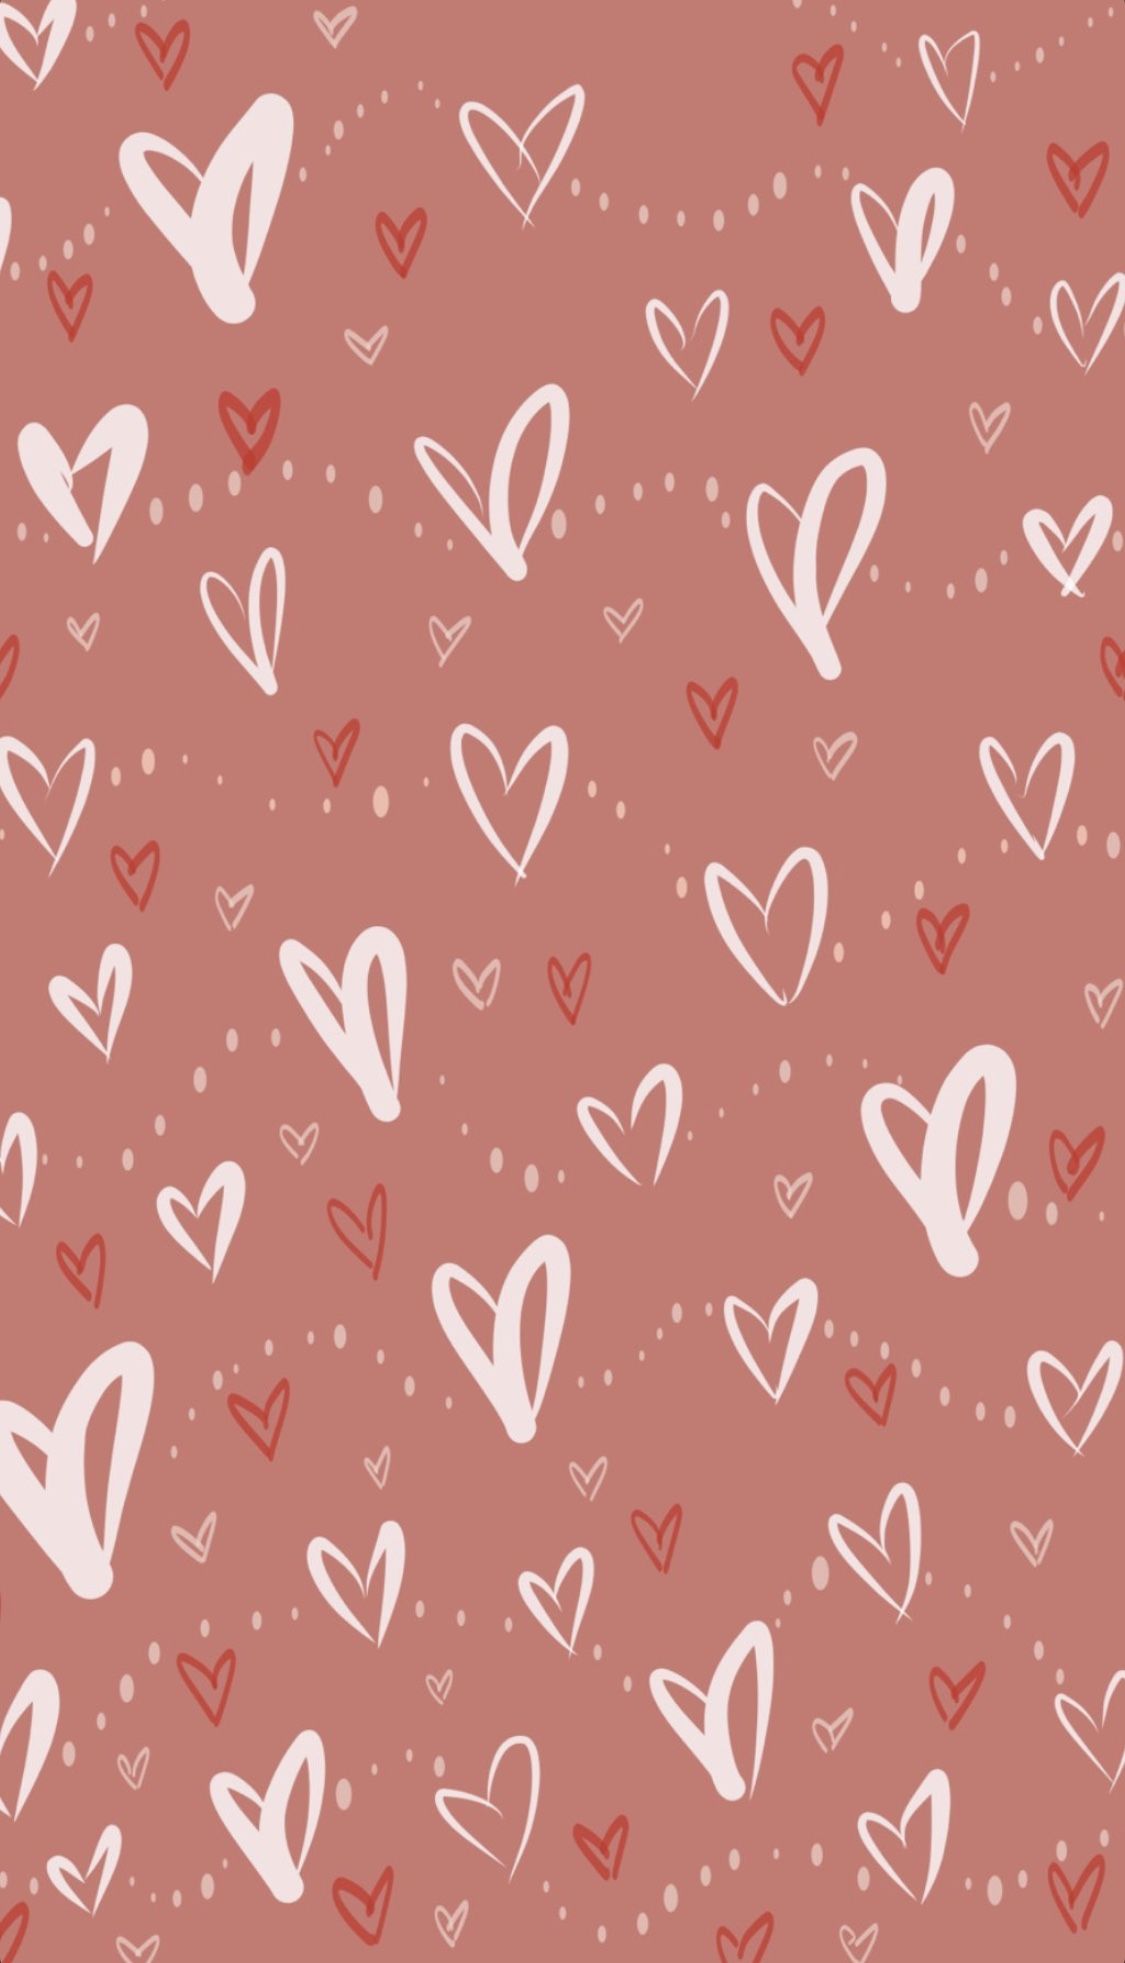 65 Cute Valentine's Day Wallpapers For iPhone (Free Download!)